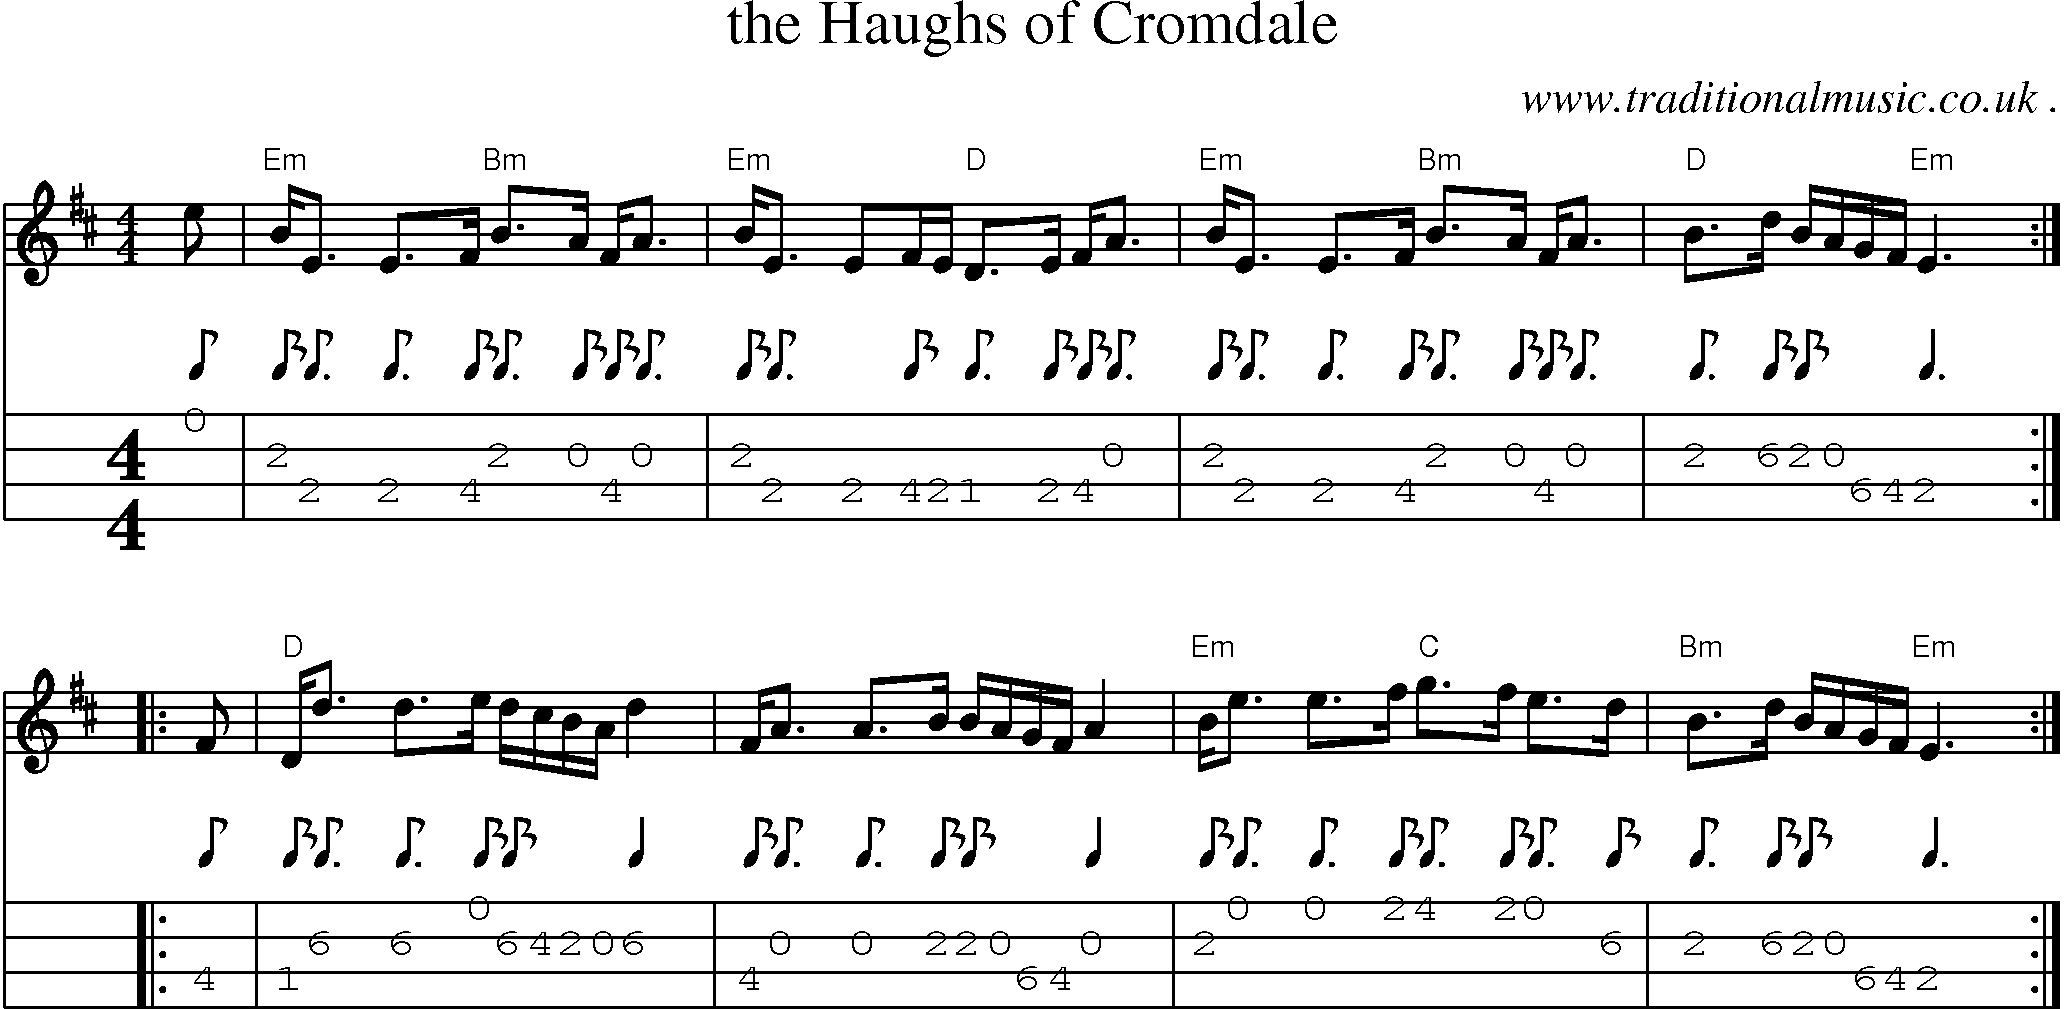 Sheet-music  score, Chords and Mandolin Tabs for The Haughs Of Cromdale